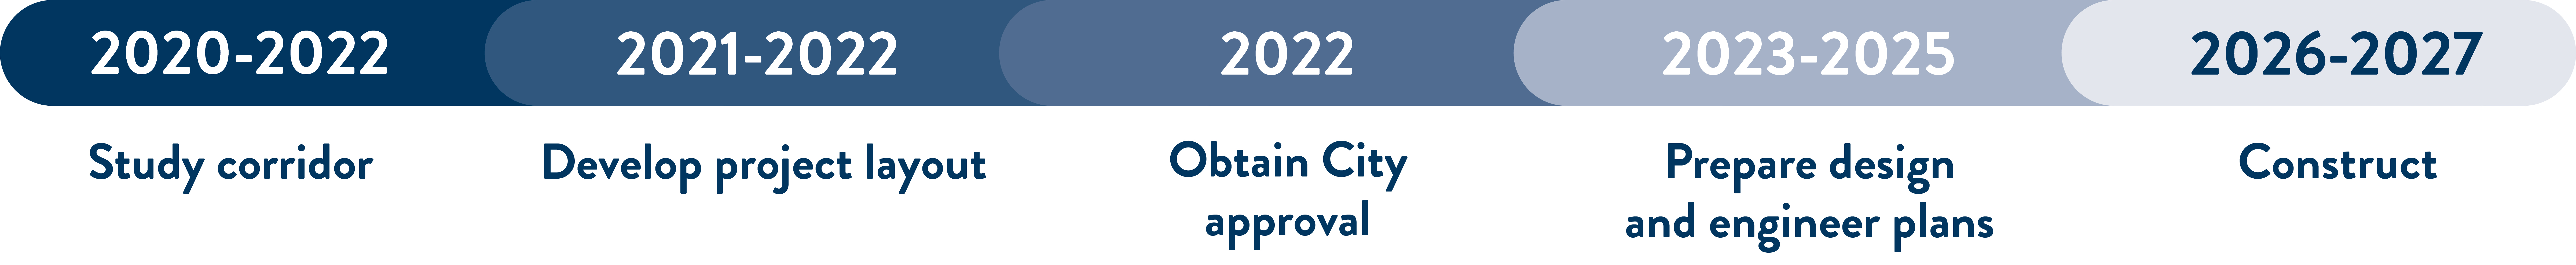 2020-2022: Study corridor; 2021-2022: develop project layout; 2022: obtain city approvals; 2023-2-25: prepare design and engineer plans; 2026-2027: construct.